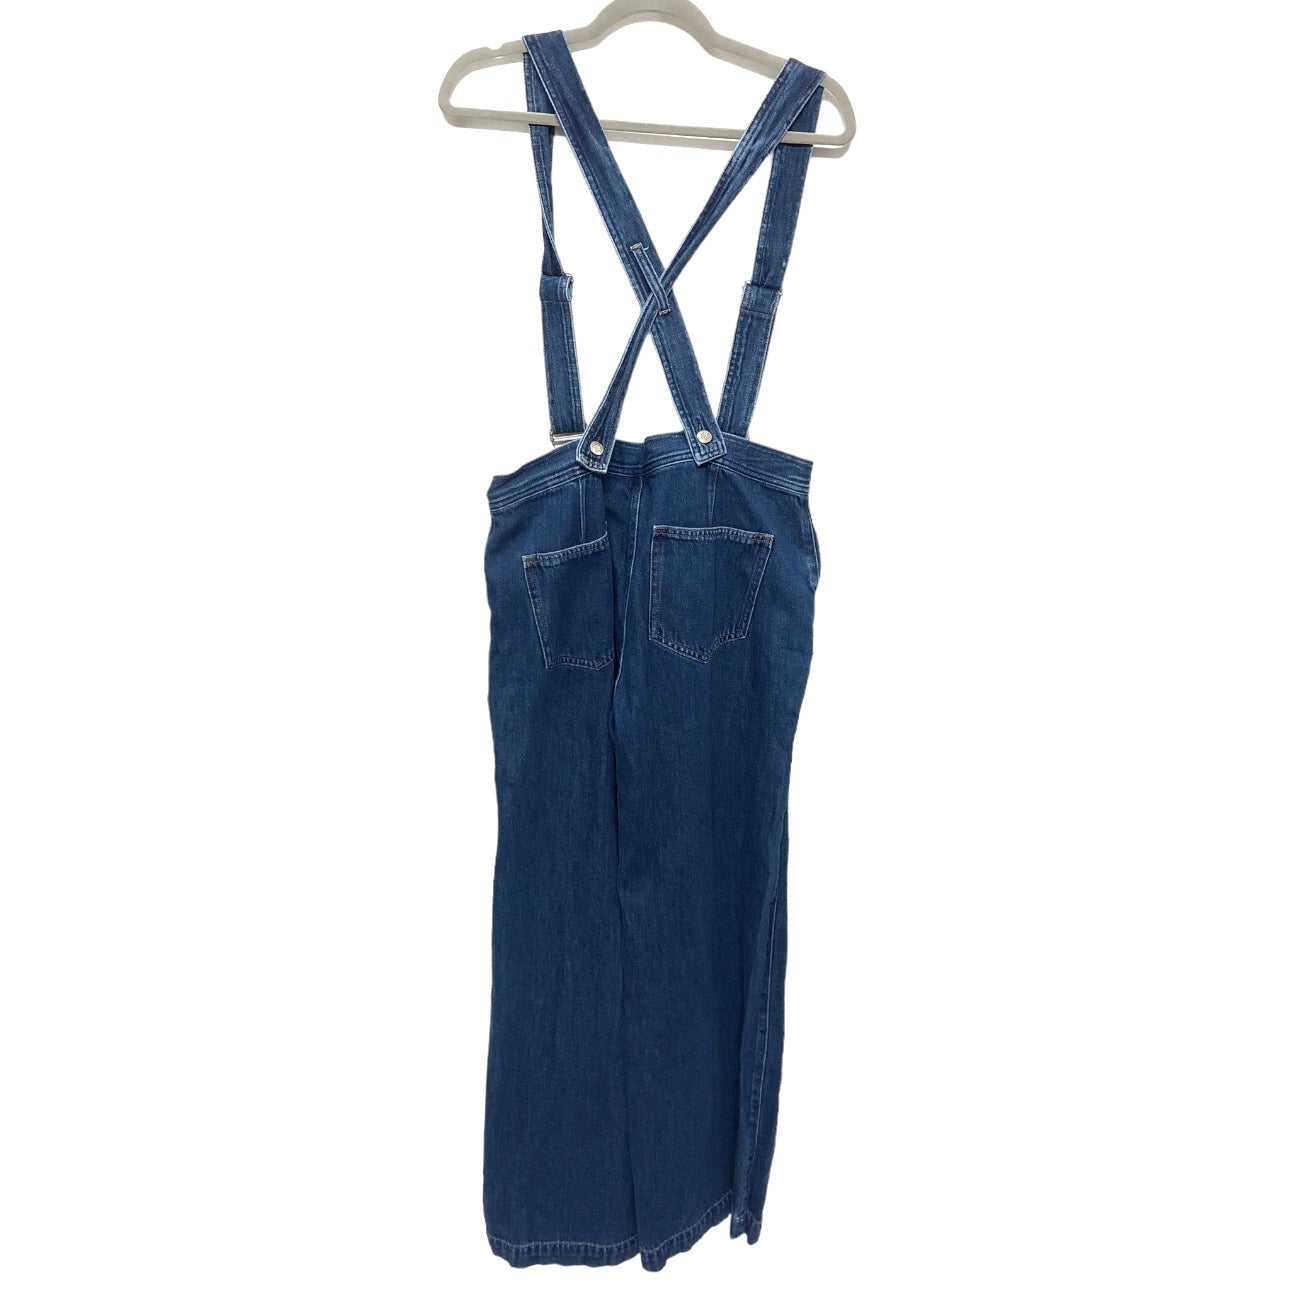 Overalls By Gap  Size: 10